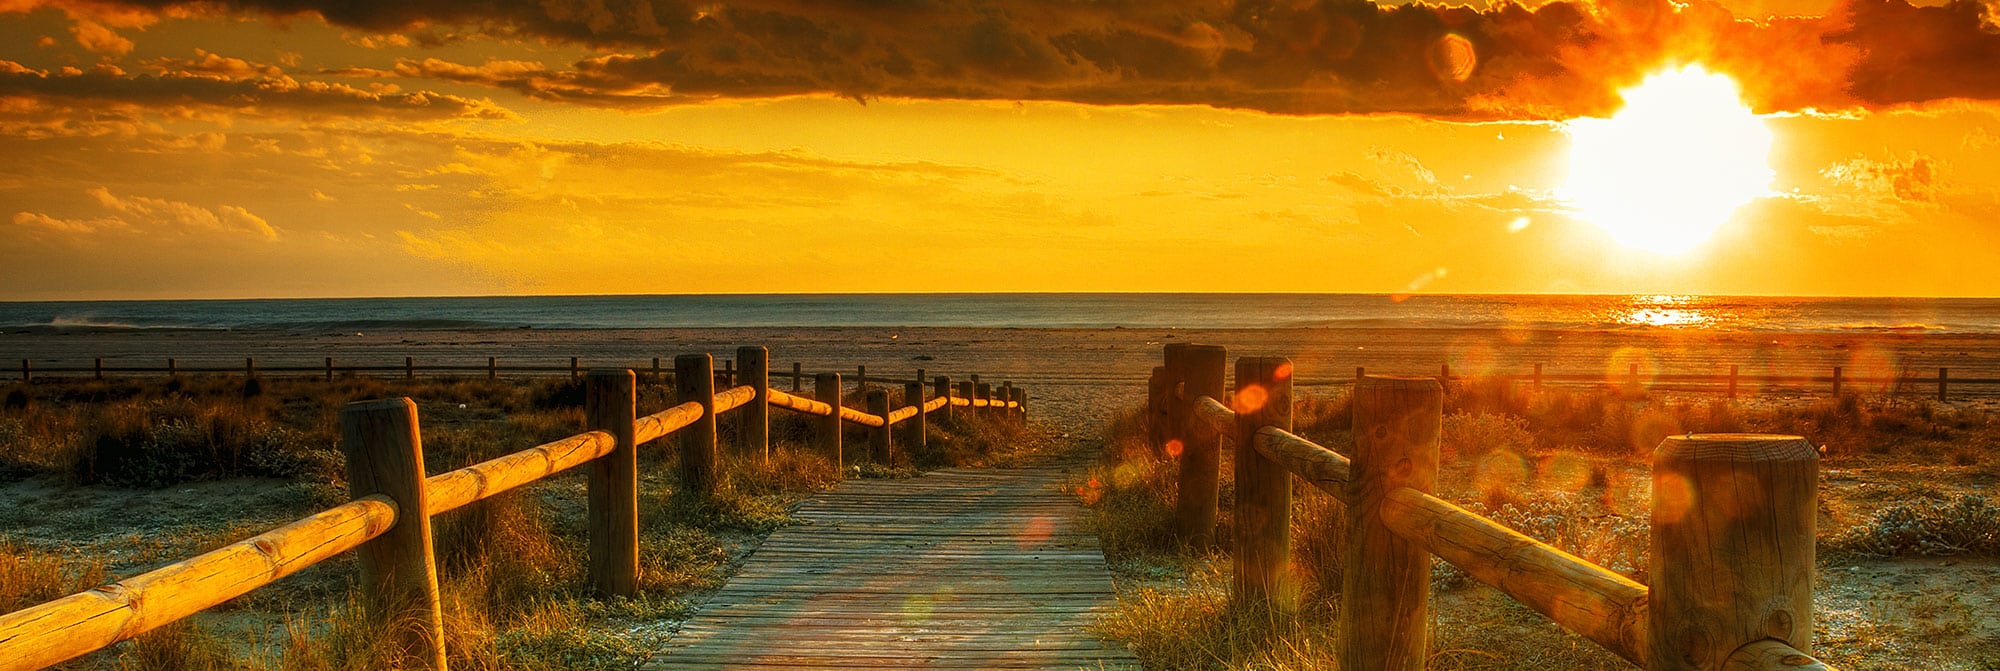 Wood fenced boardwalk going towards sun shining brightly under clouds and setting on the ocean in the horizon, 